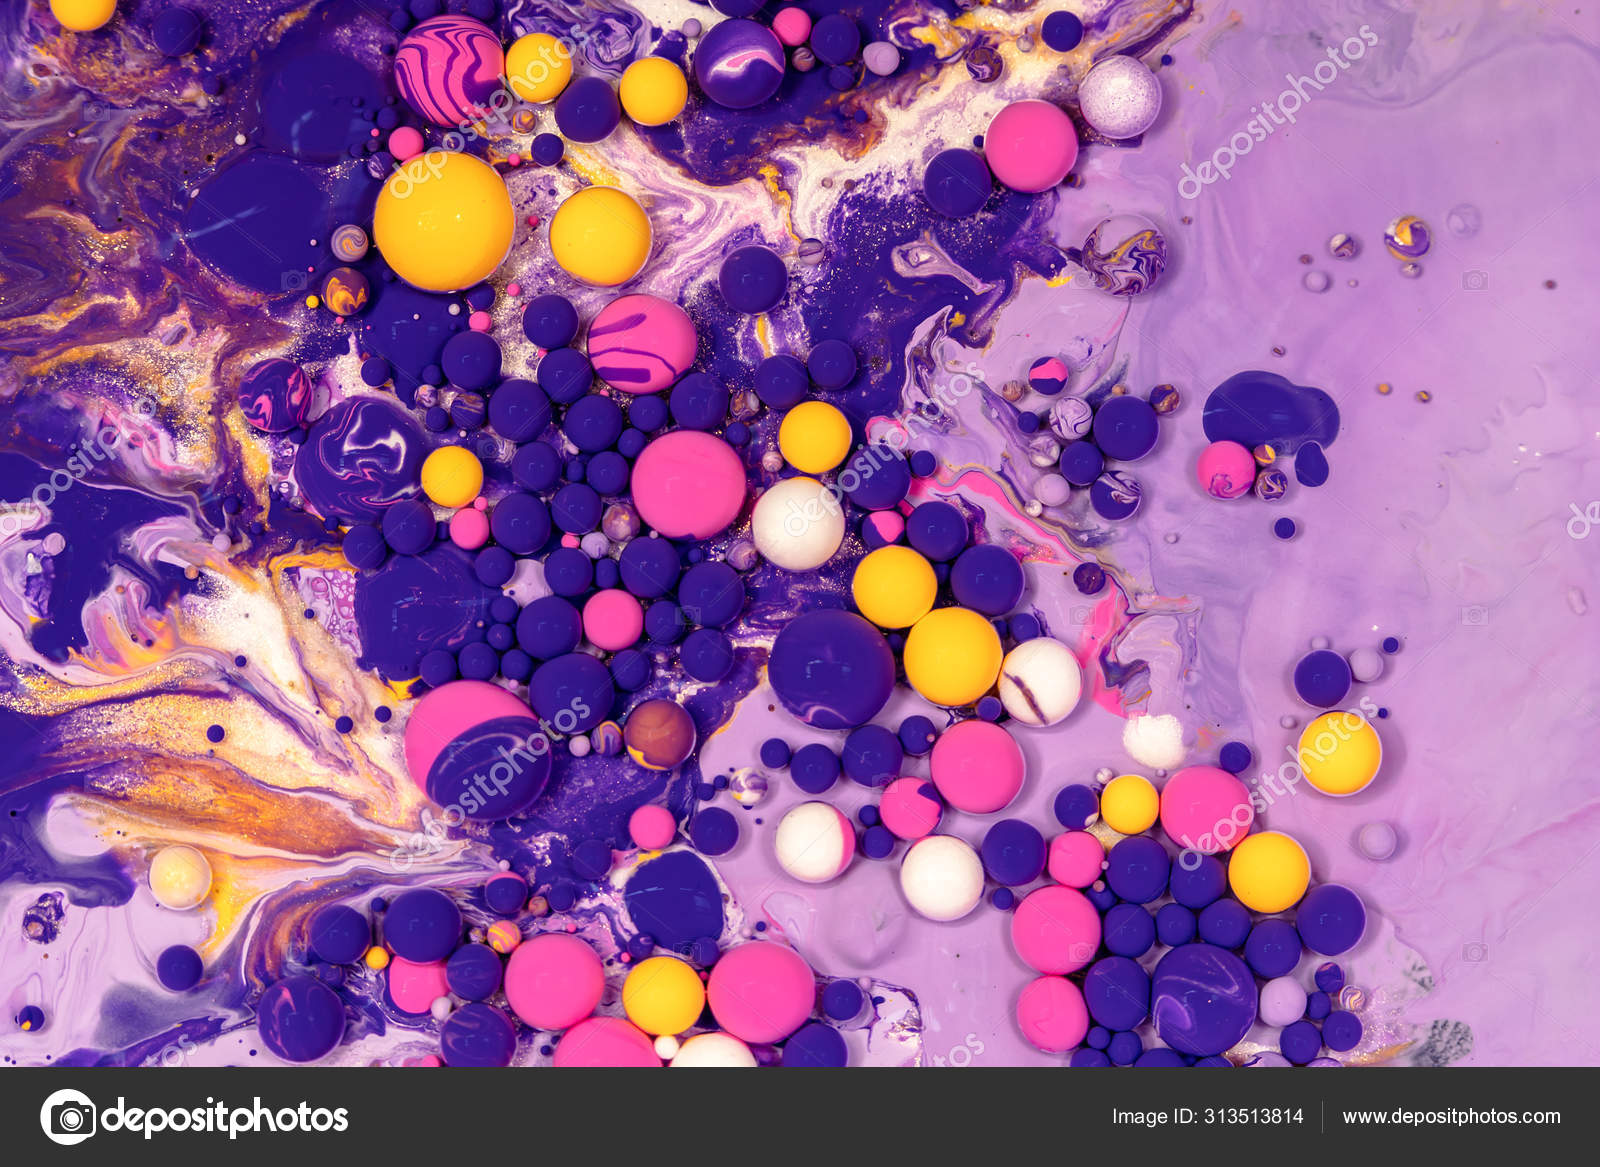 Acrylic paint balls abstract texture. Bright colors fluid, flowing